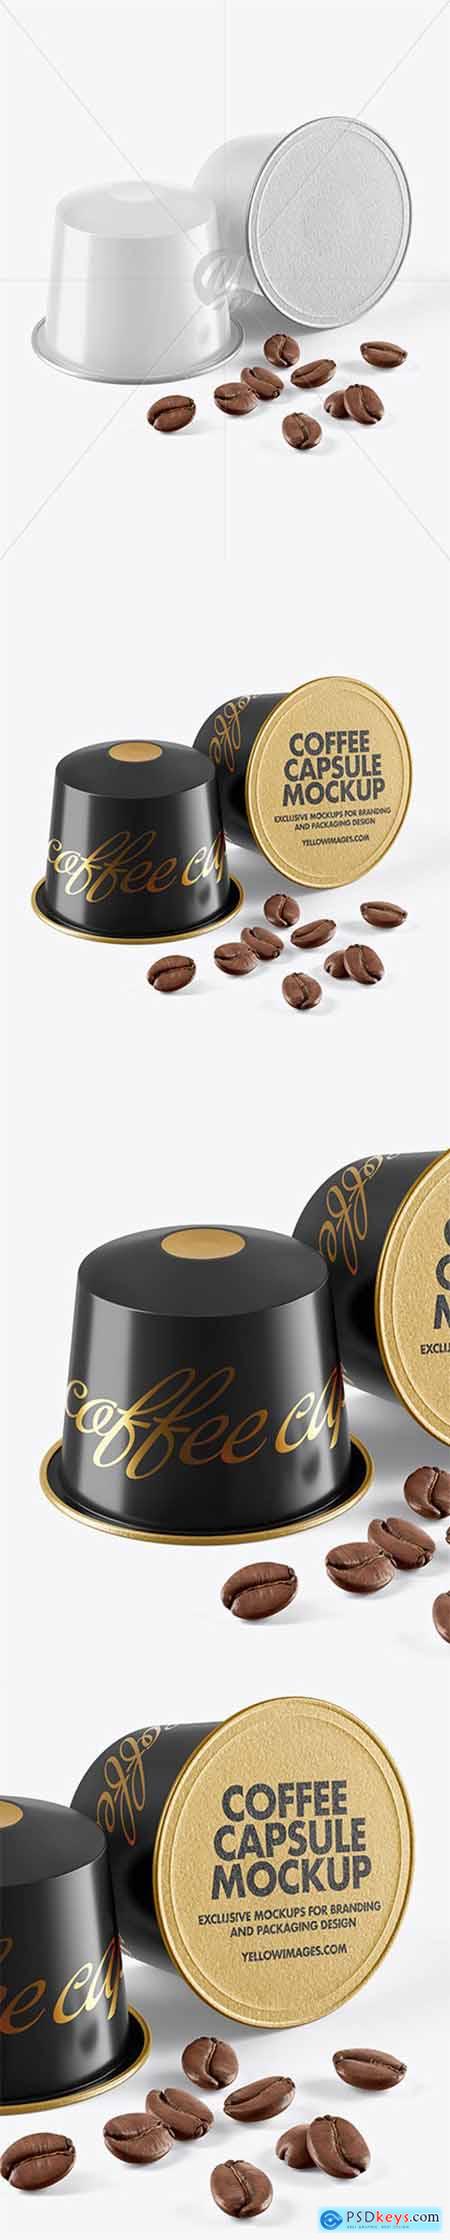 Download Two Coffee Capsules with Coffee Beans Mockup 59443 » Free Download Photoshop Vector Stock image ...